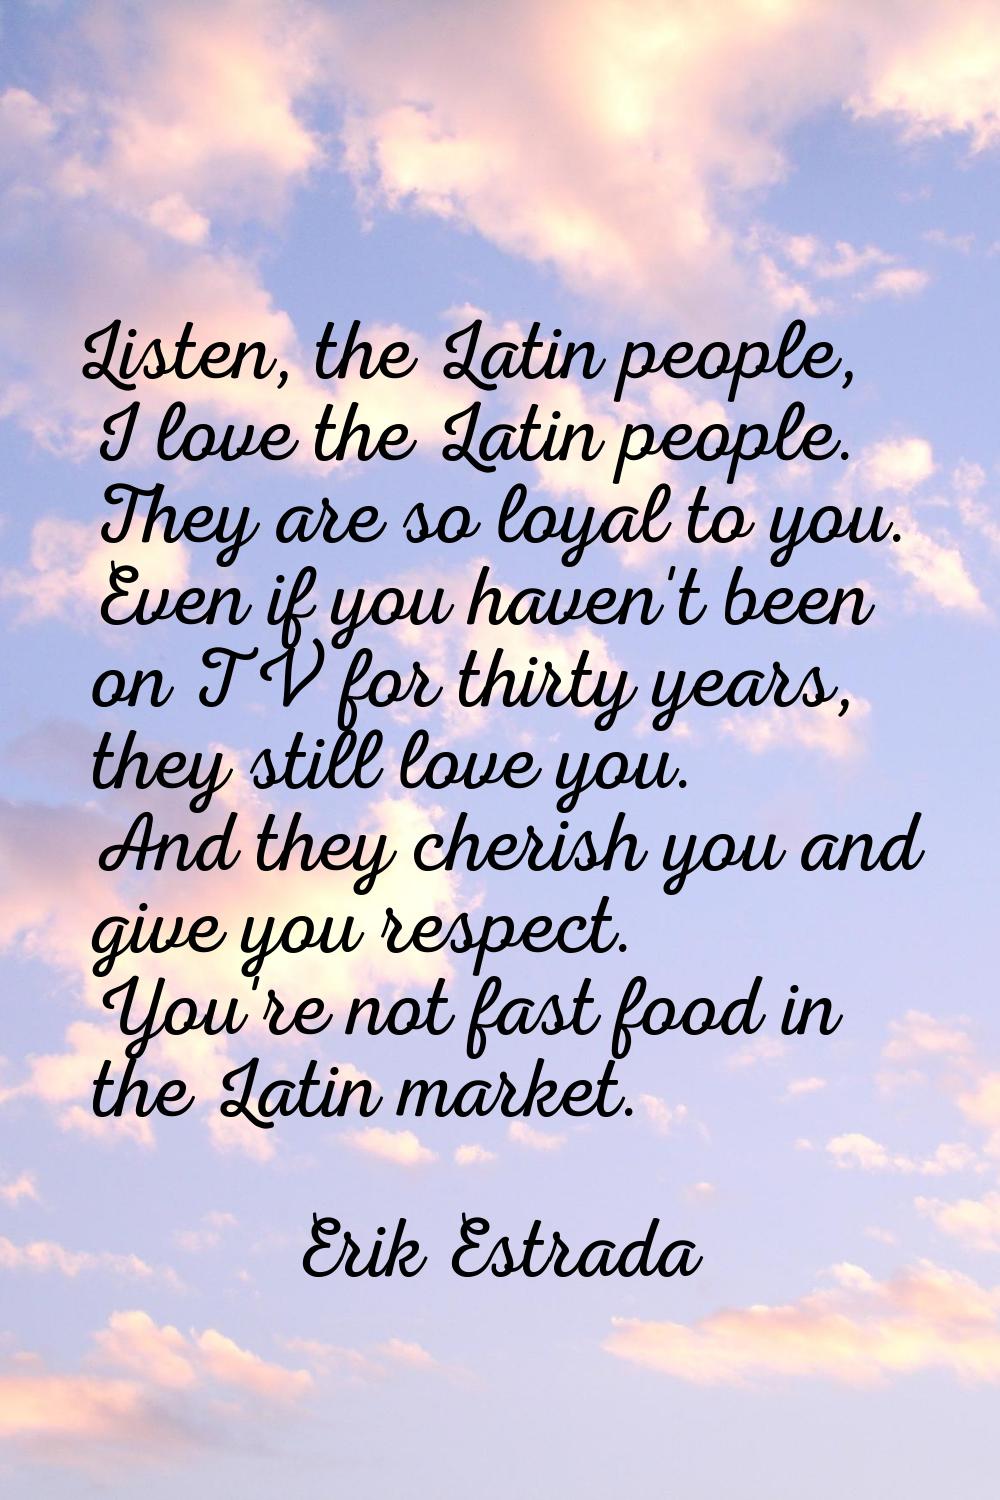 Listen, the Latin people, I love the Latin people. They are so loyal to you. Even if you haven't be